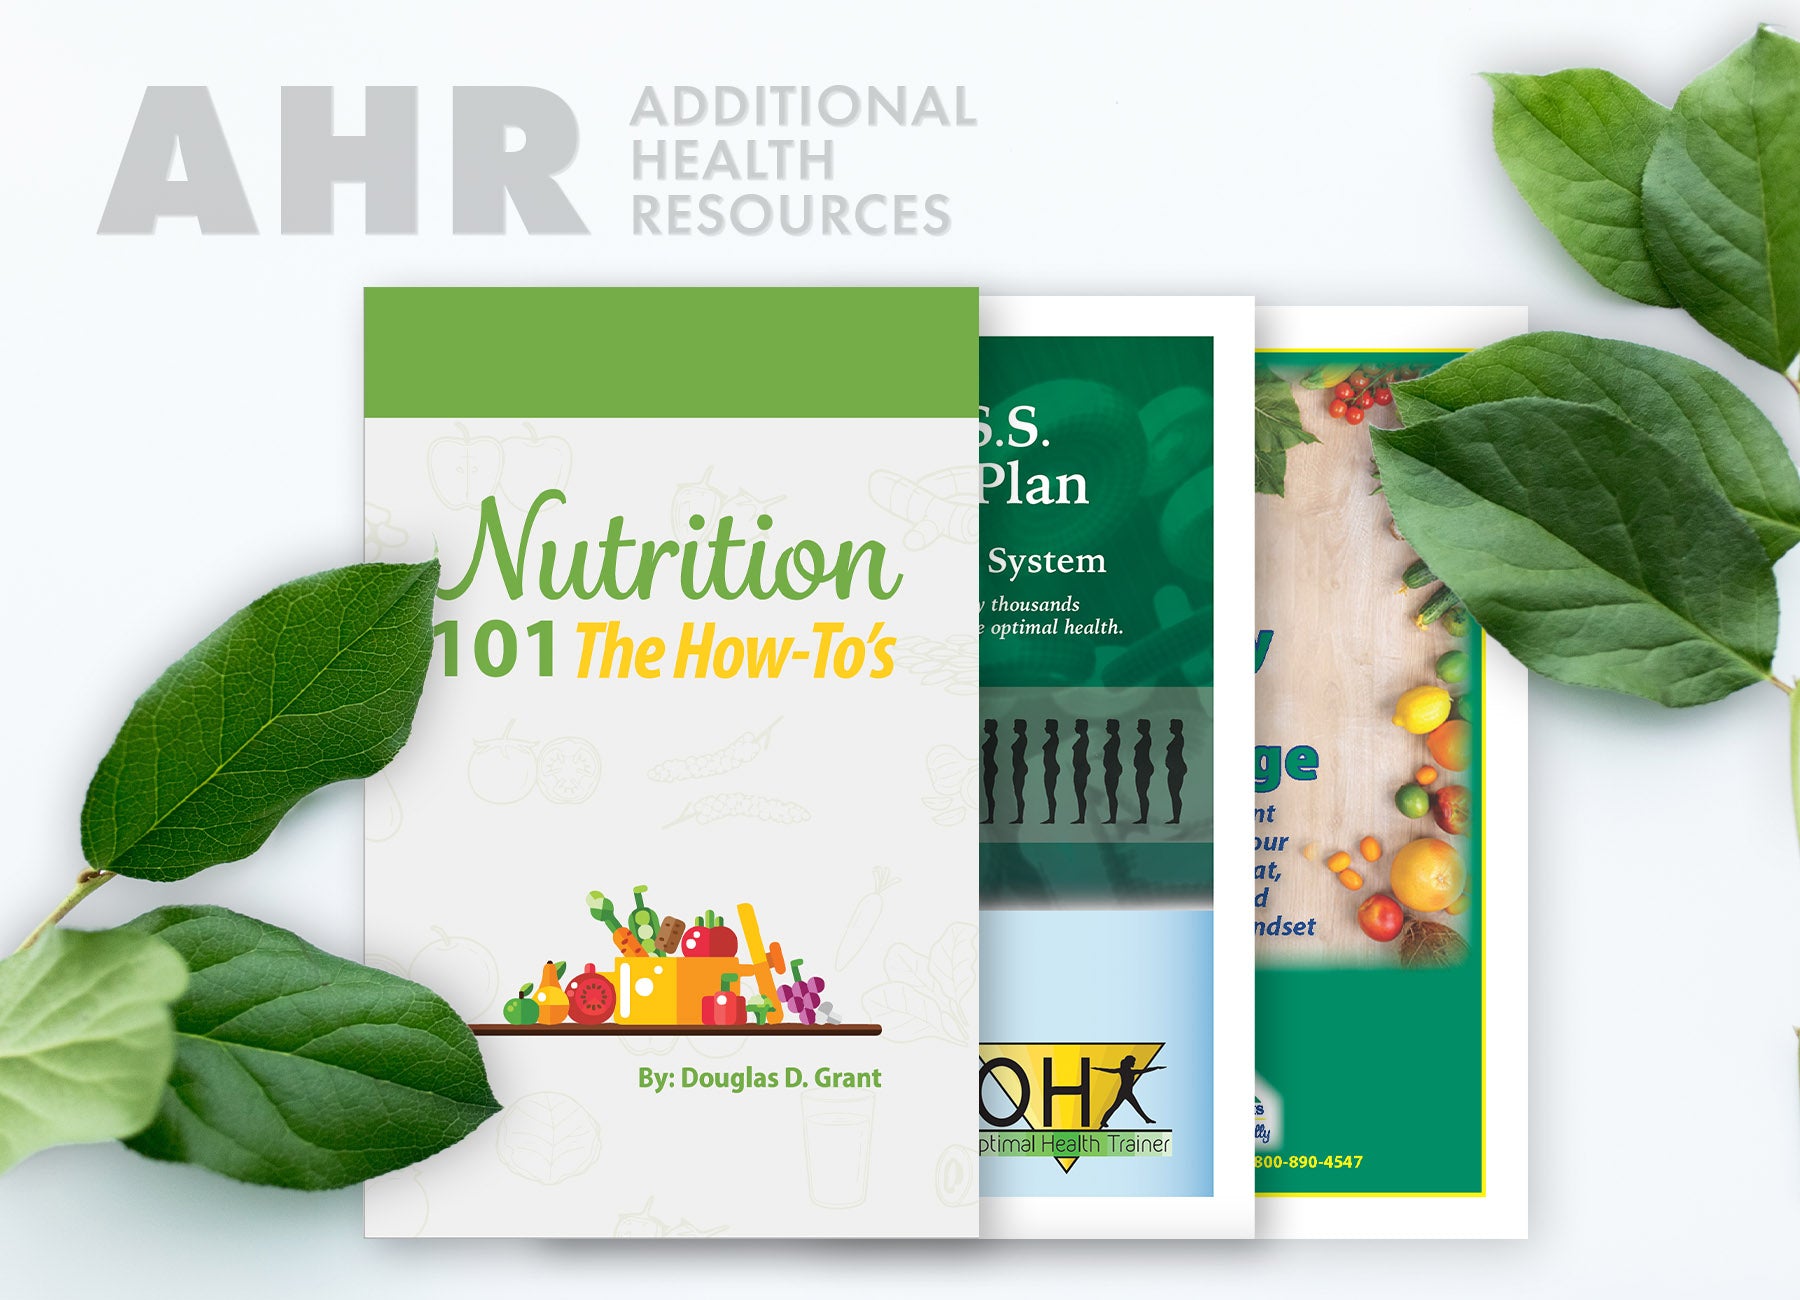 Image of 3 books/Booklets stacked ontop of each other. The image says "AHR ADDITIONAL HEALTH RESOURCES." There are leaves on the left and right.